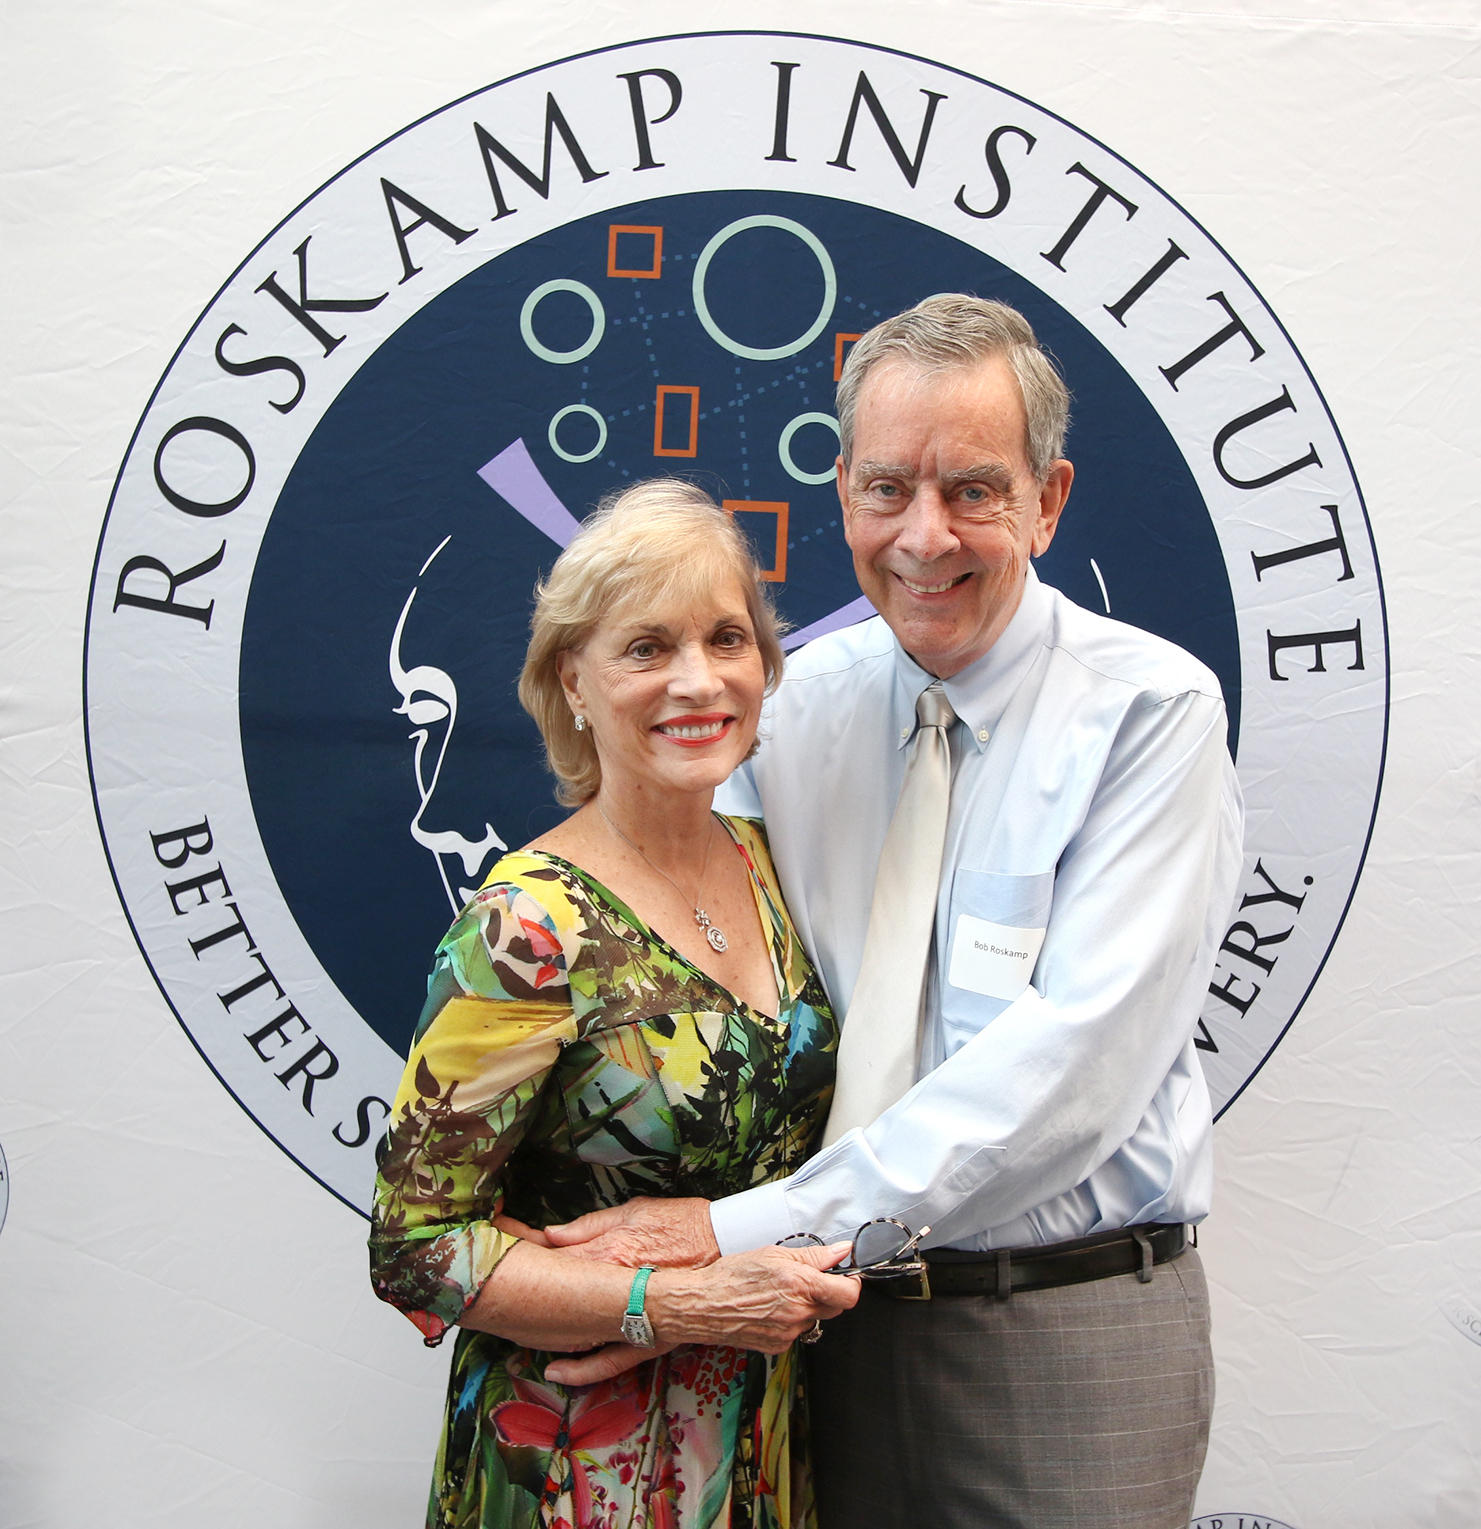 Diane and Bob Roskamp were all smiles at the Grey Matters Luncheon on Sept. 22 at Sarasota Yacht Club.